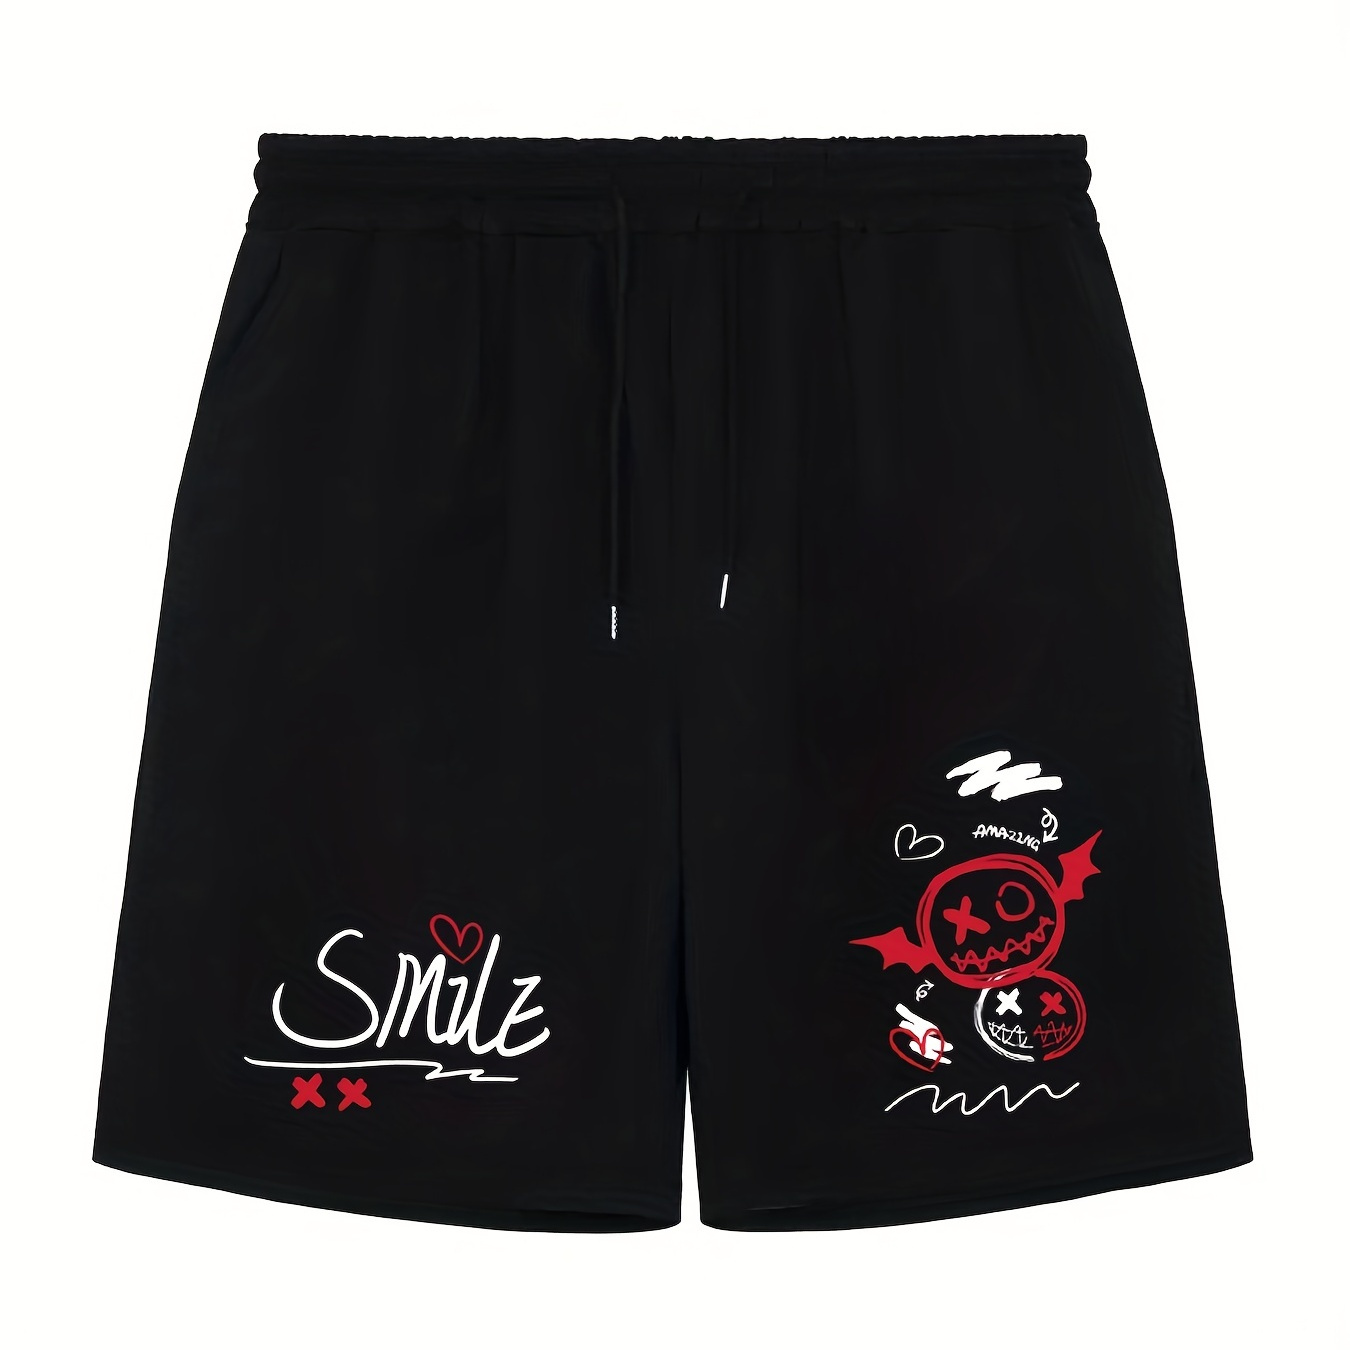 

Smiling Face Pattern Comfy Shorts With Slant Pocket, Men's Casual Stretch Waist Drawstring Shorts For Summer Basketball Beach Resort